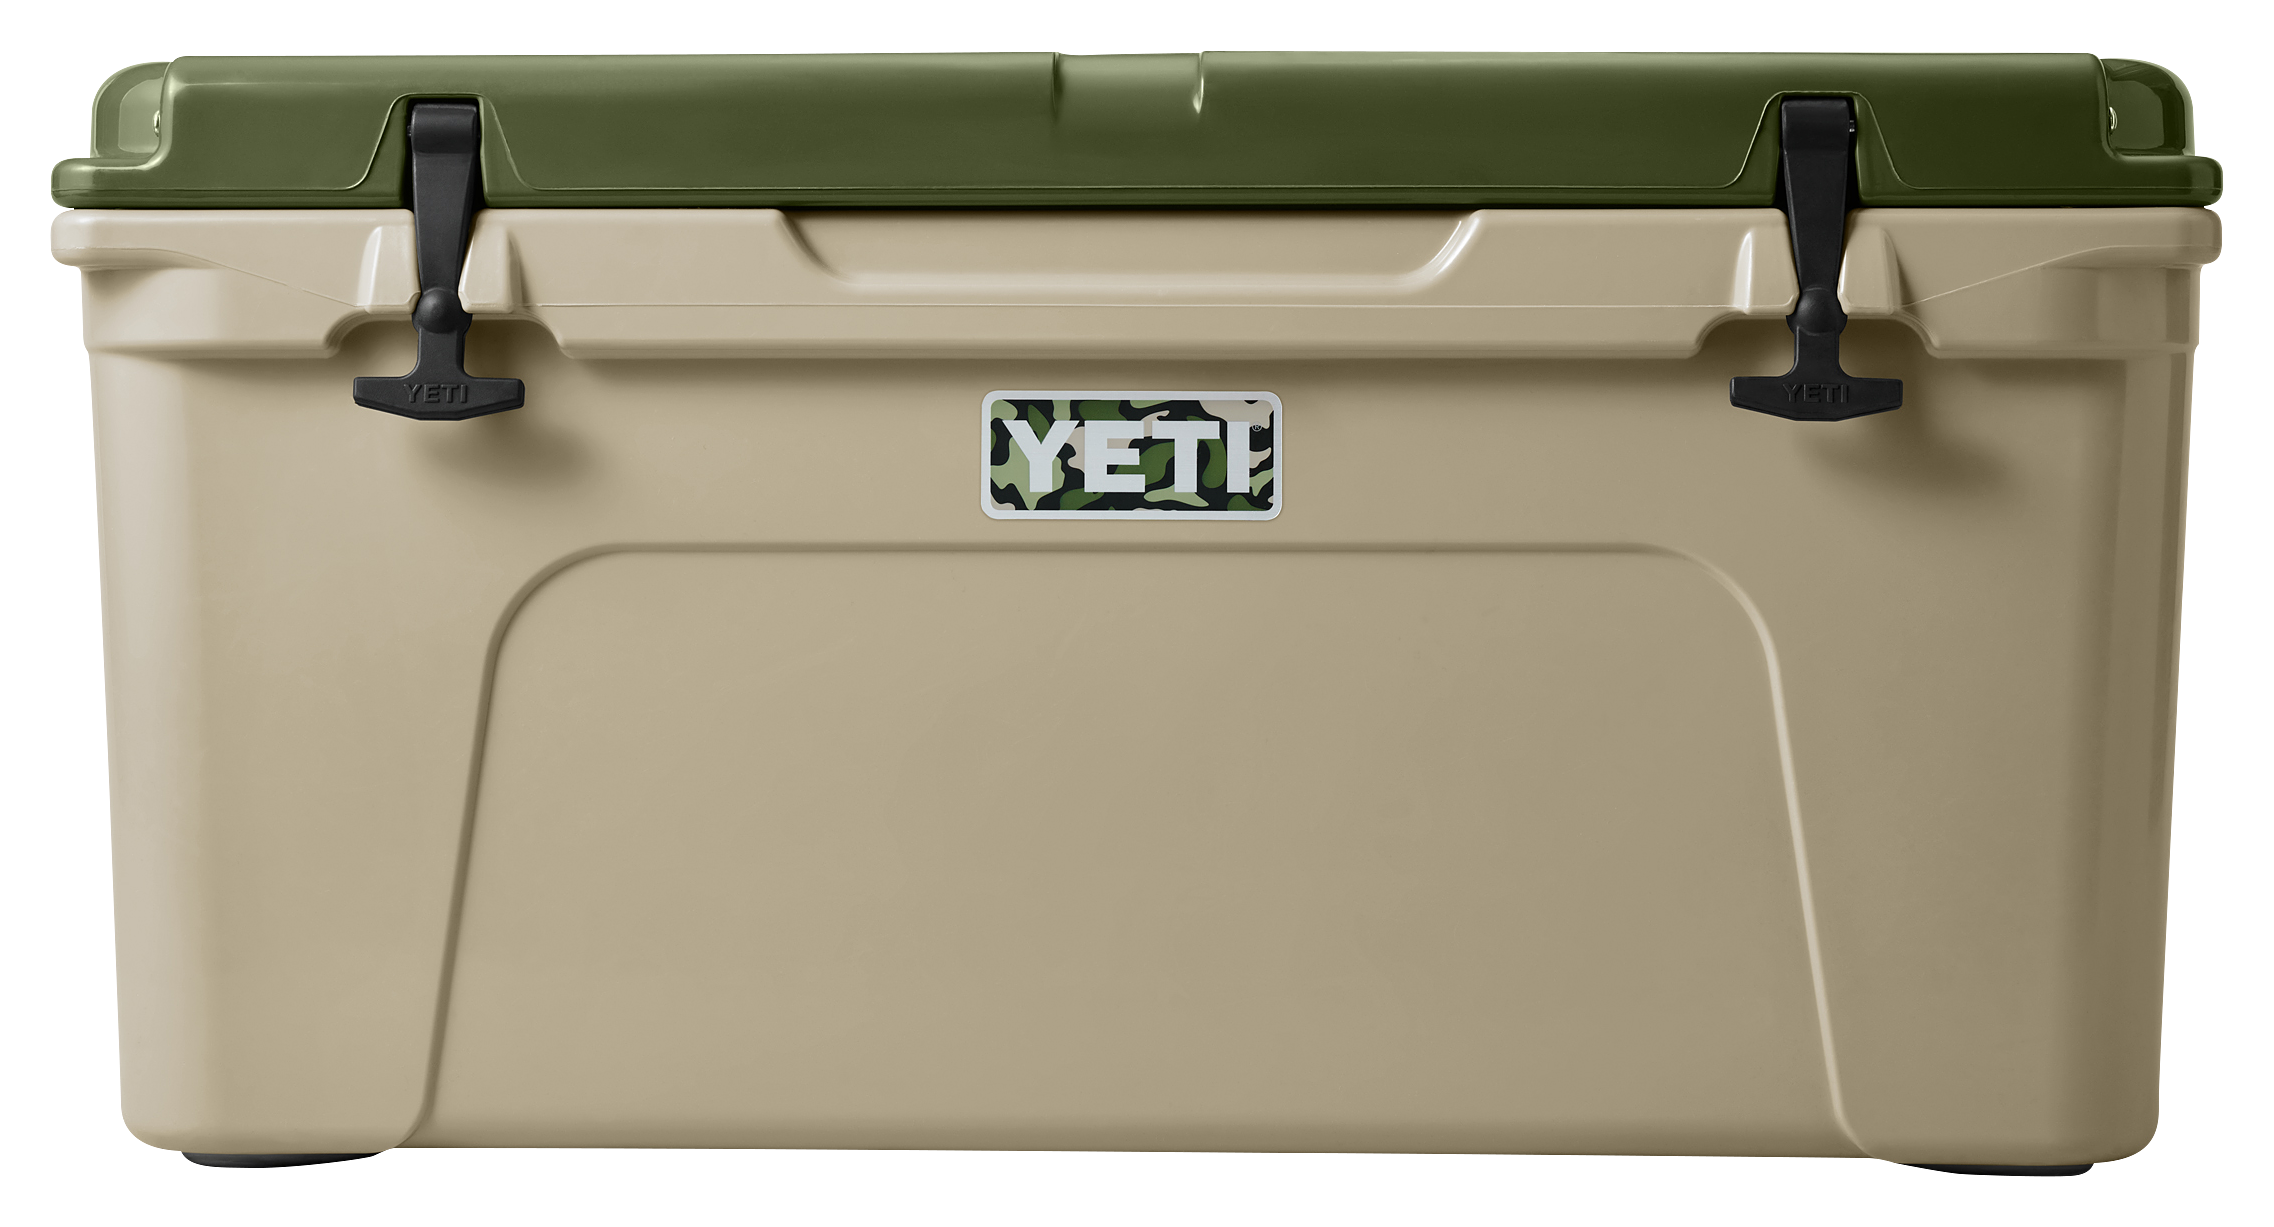 YETI Tundra 65 Limited Edition Charcoal Cooler